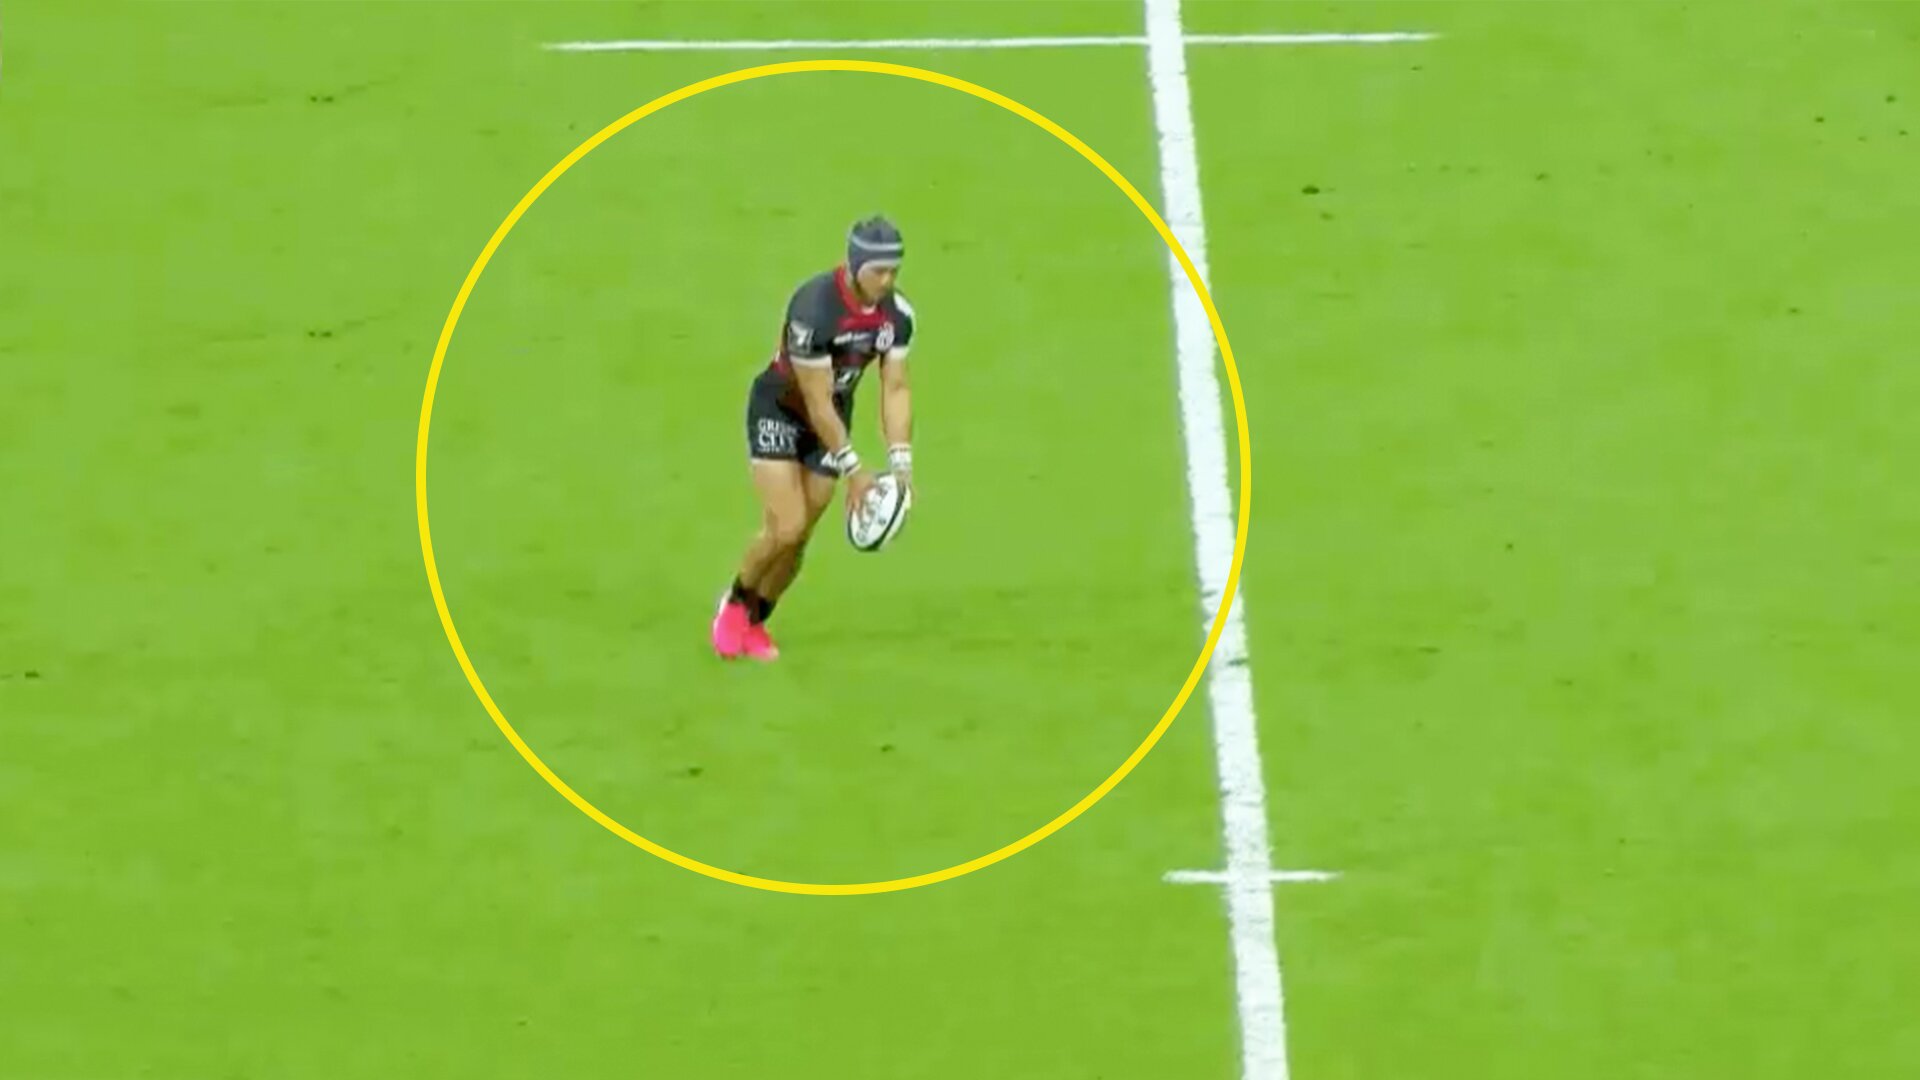 Cheslin Kolbe moment from last night's Top 14 final has Lions fans worried